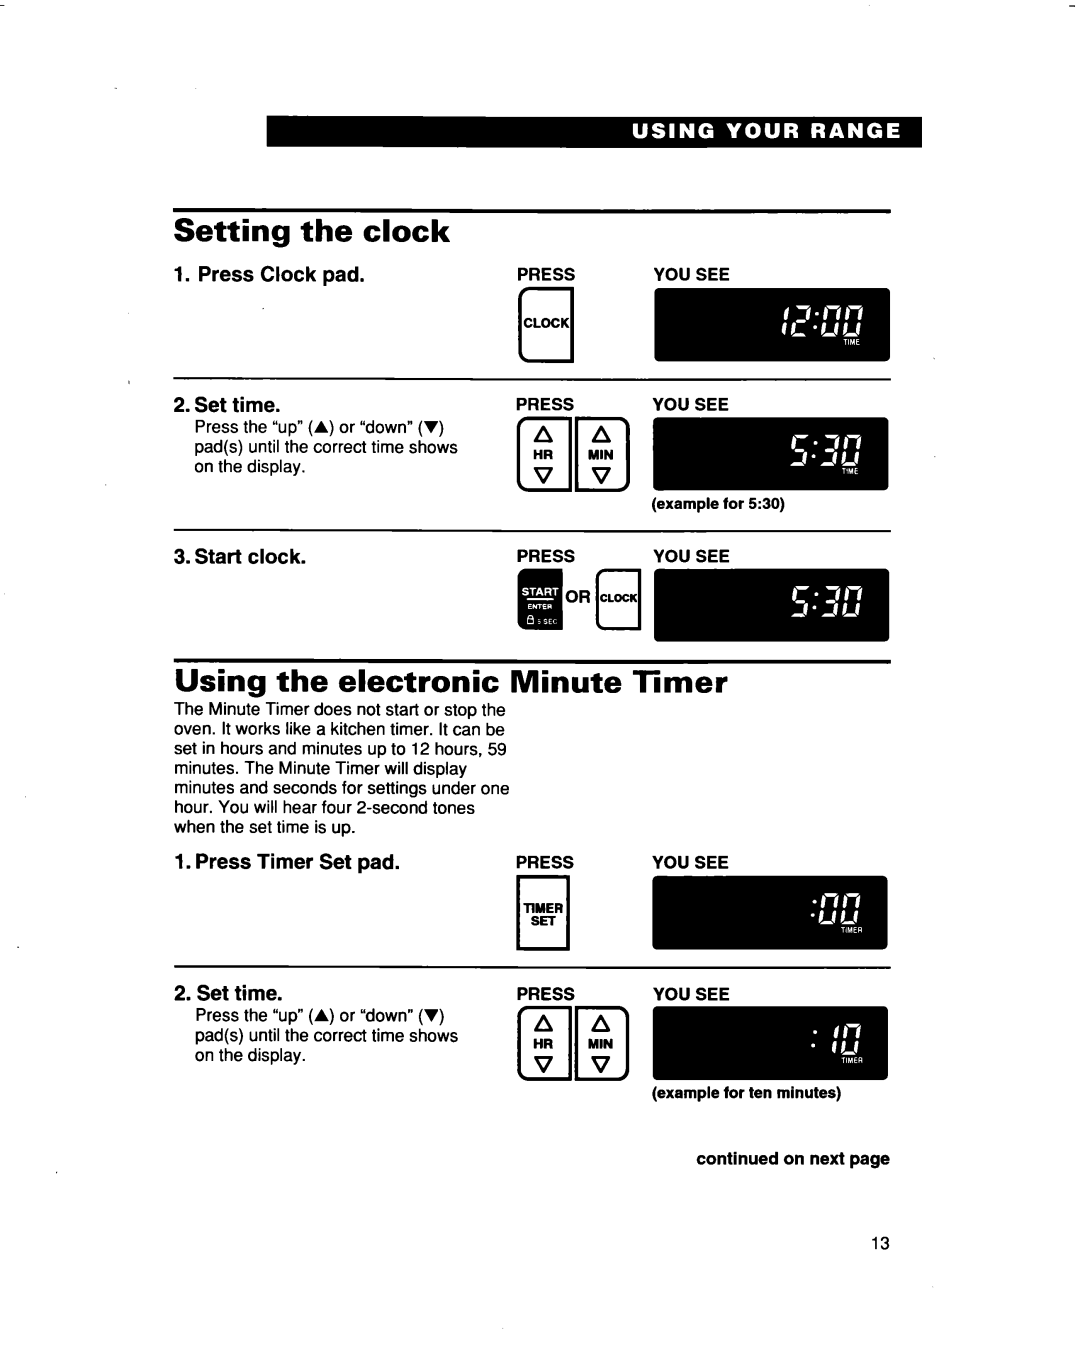 Whirlpool RF376PXD Setting the clock, Using the electronic Minute Timer, Press Clock pad, time, clot, Press Timer Set pad 